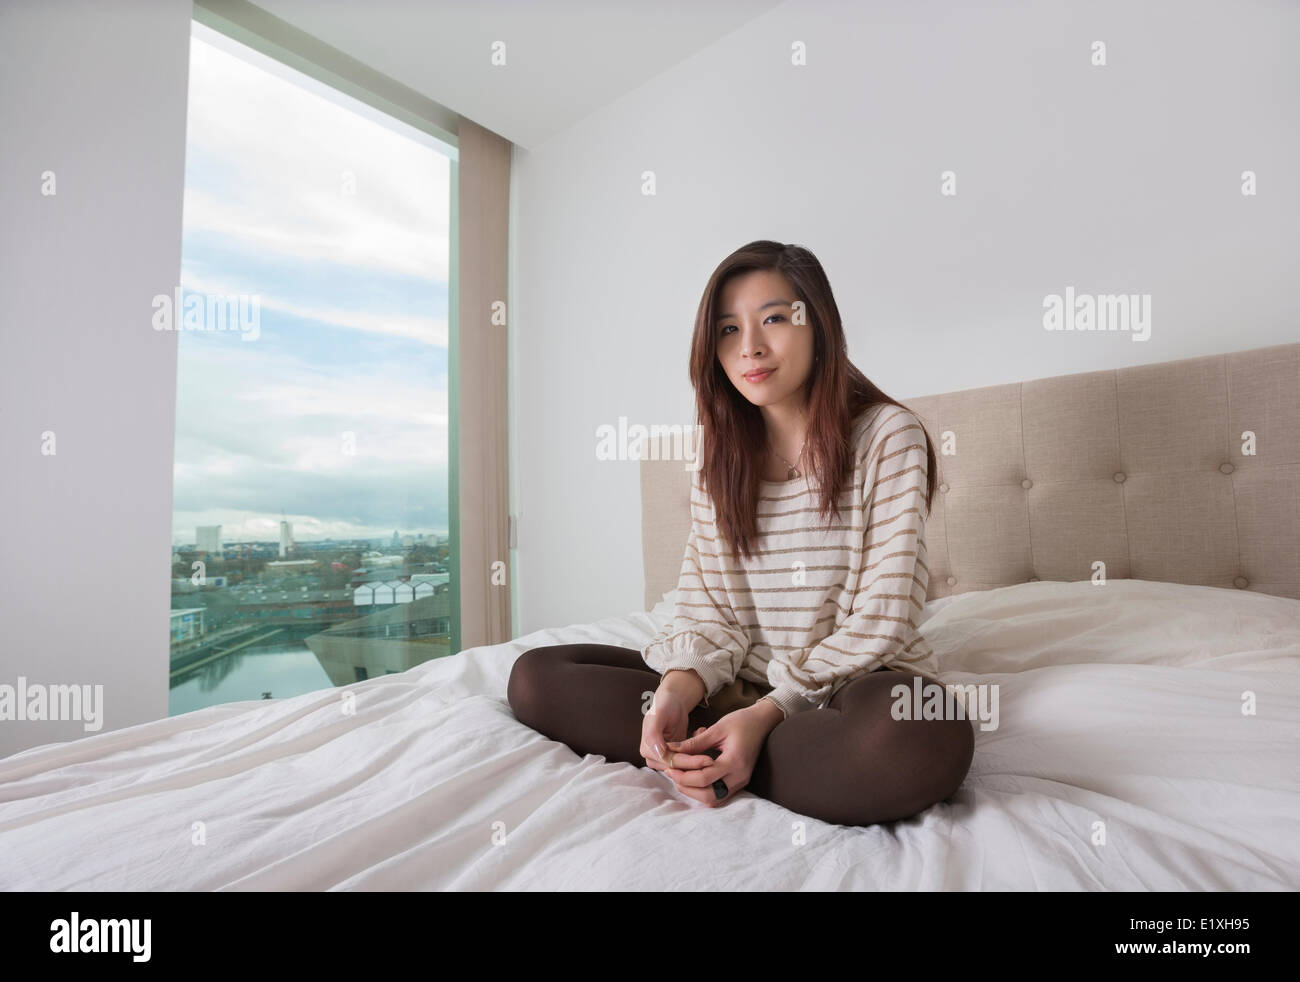 Portrait of beautiful young woman sitting on bed Banque D'Images